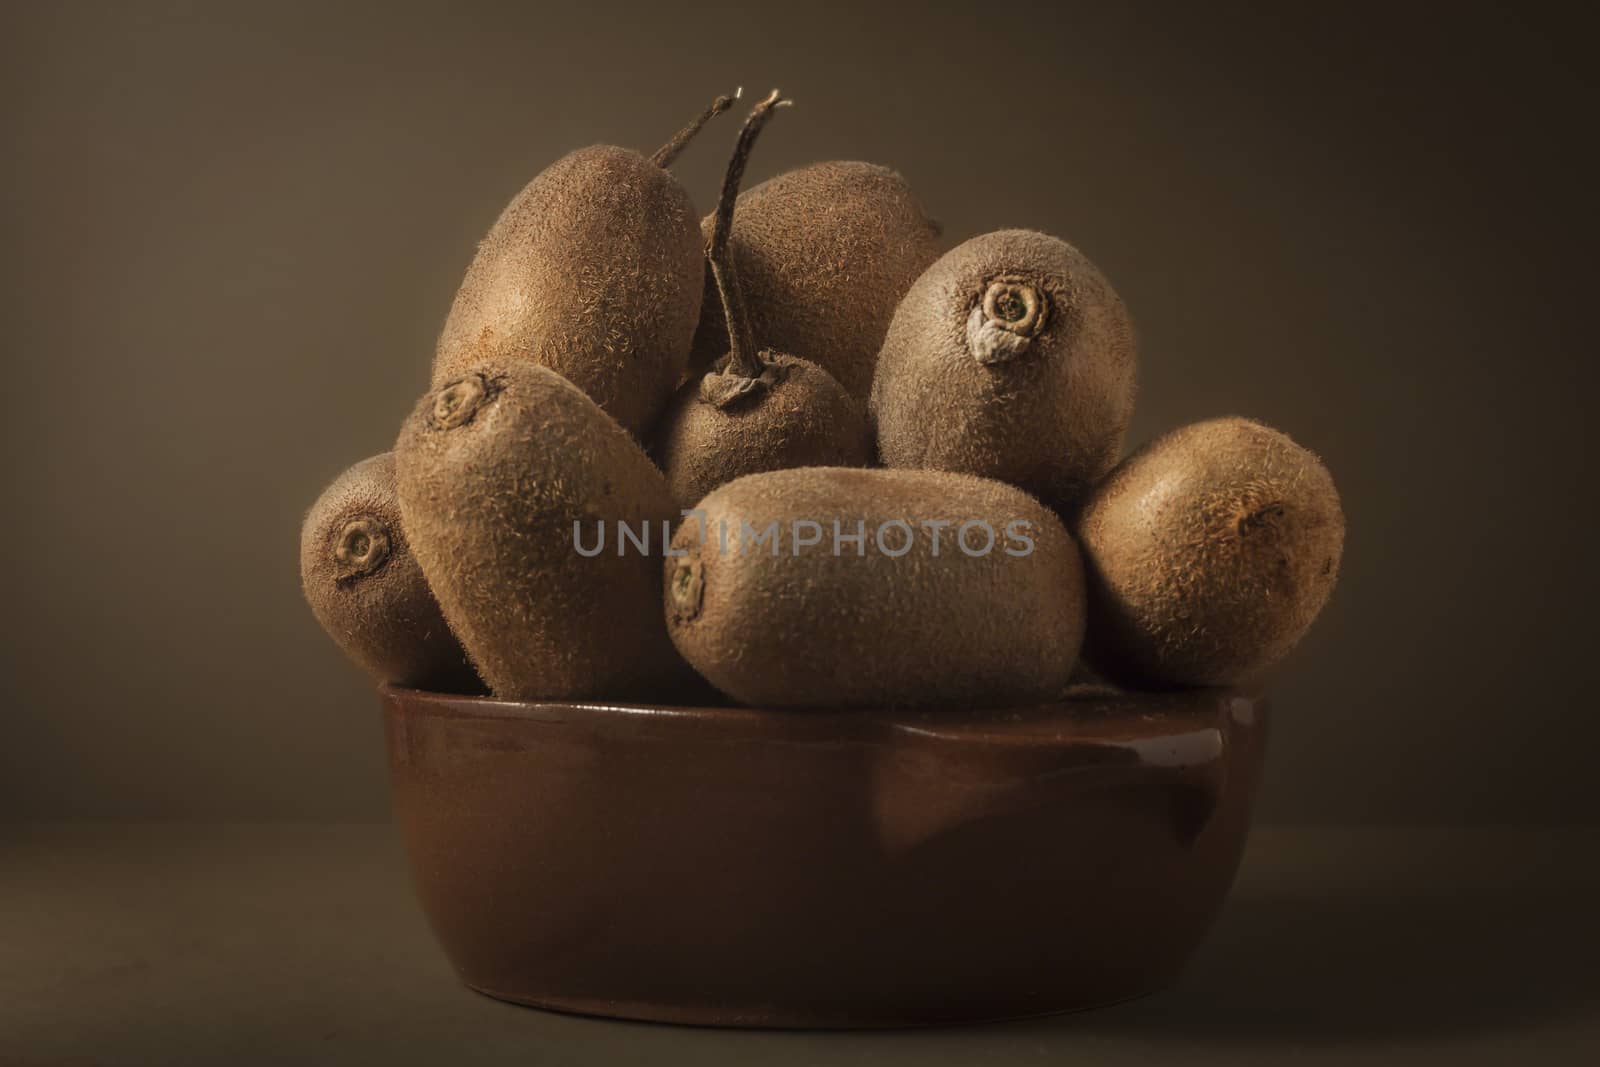 Kiwi in a bowl of brown on brown background to understand a principle of healthy eating